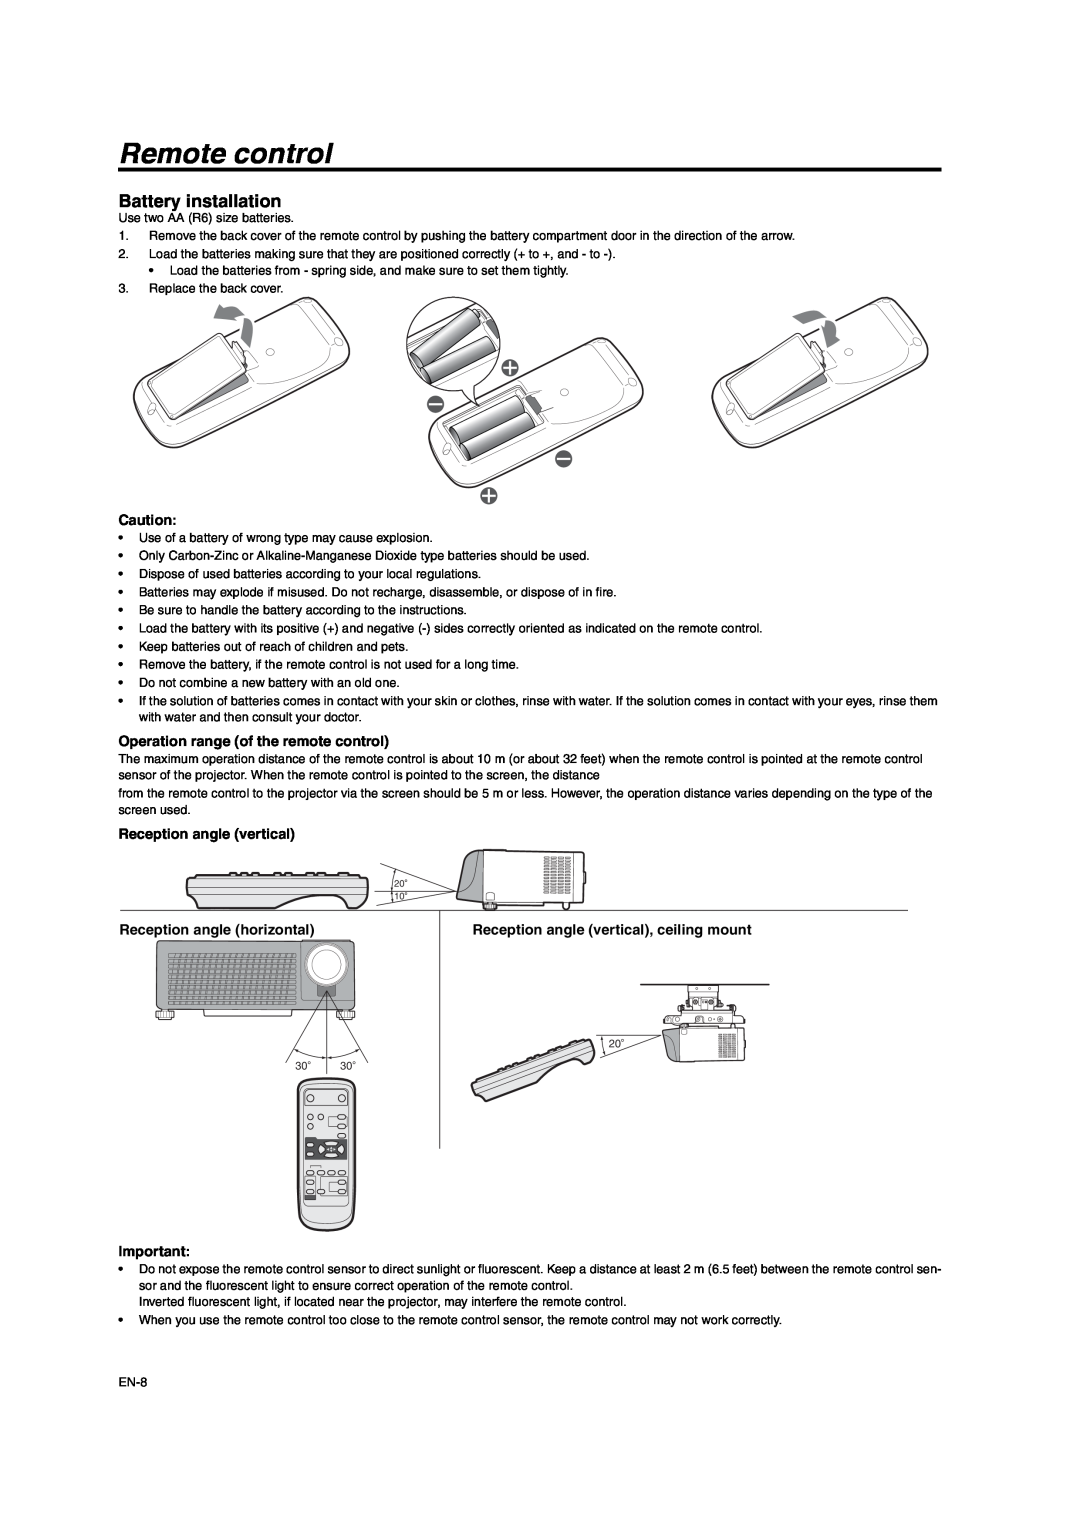 Mitsumi electronic XD206U user manual Remote control, Battery installation, Operation range of the remote control 